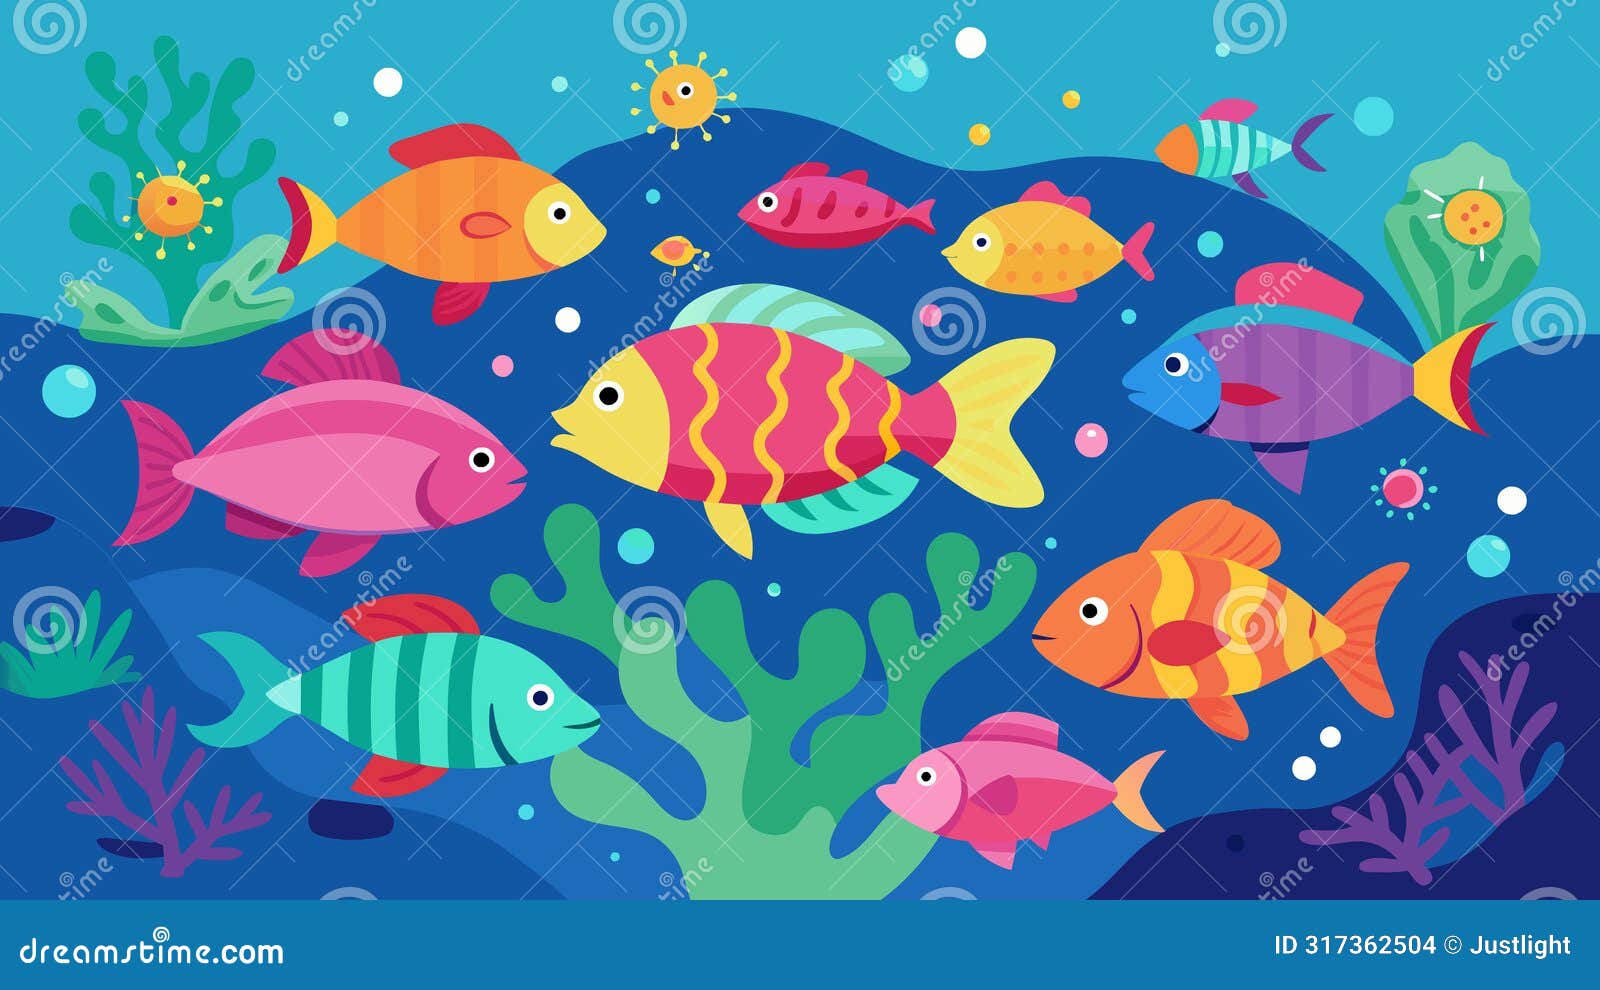 a coral reef with each colorful fish representing a different aspect of mental wellness swimming and interacting in a